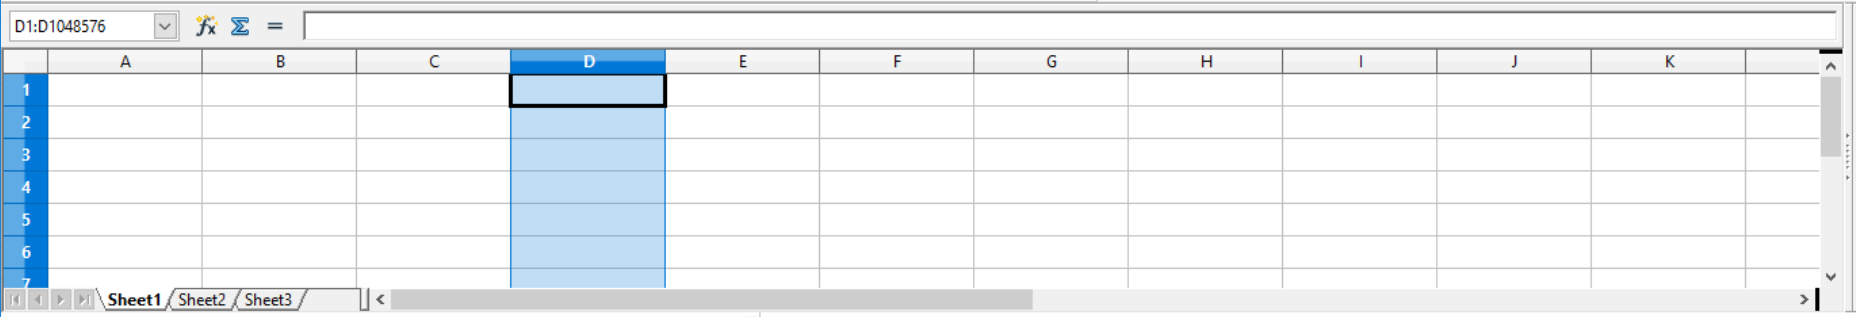 Columns in Calc spreadsheets